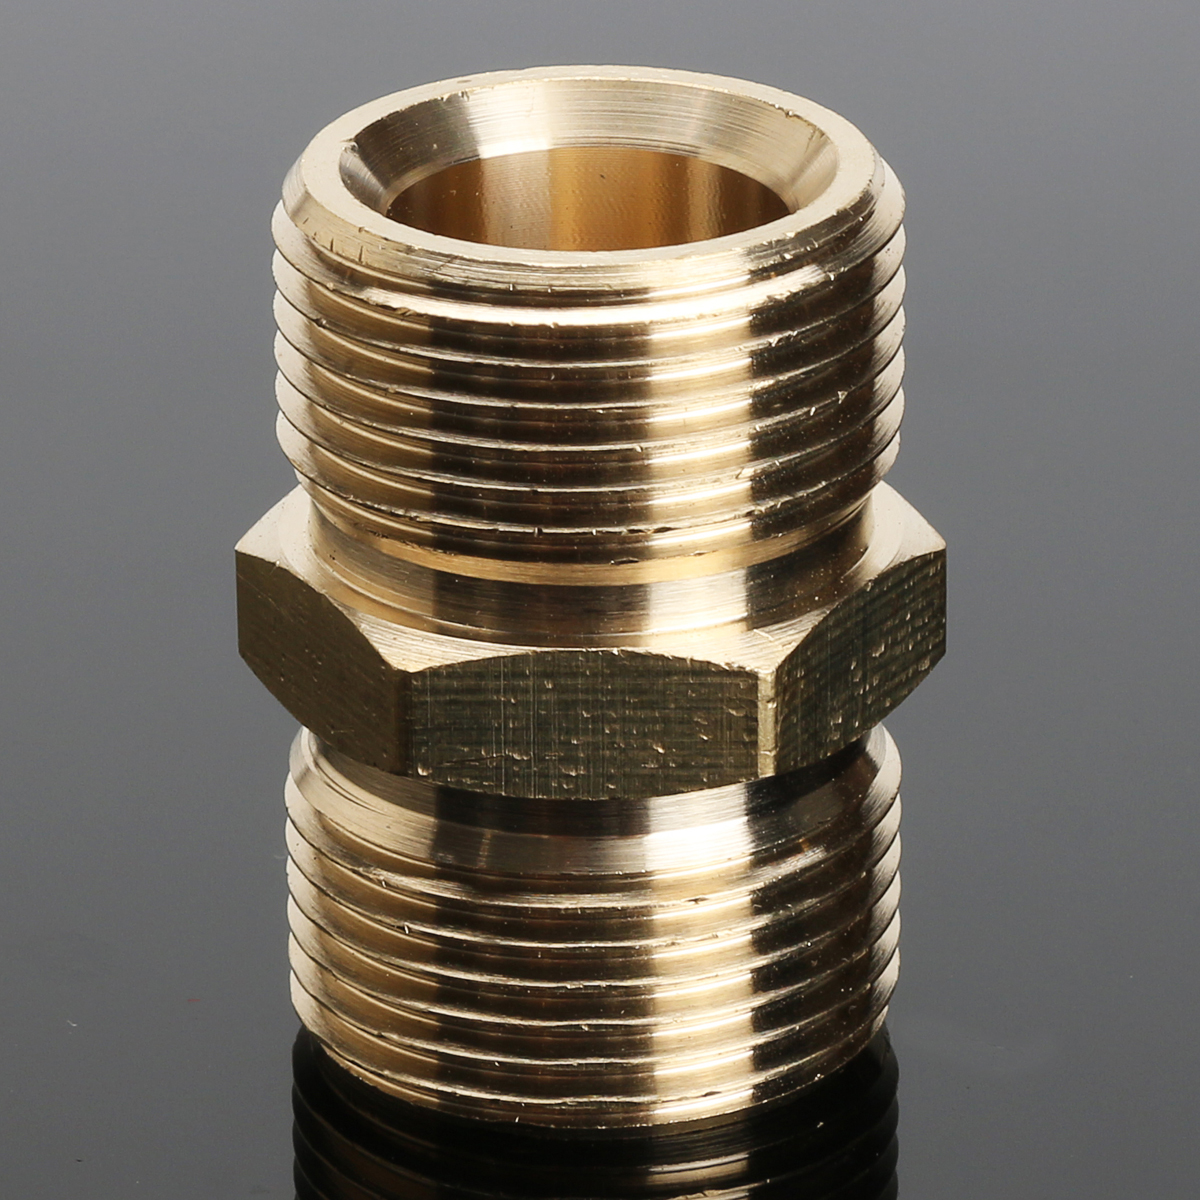 M22-Brass-Pressure-Washer-Adapter-Male-to-Male-Hose-Coulper-Fitting-for-Kacher-1172429